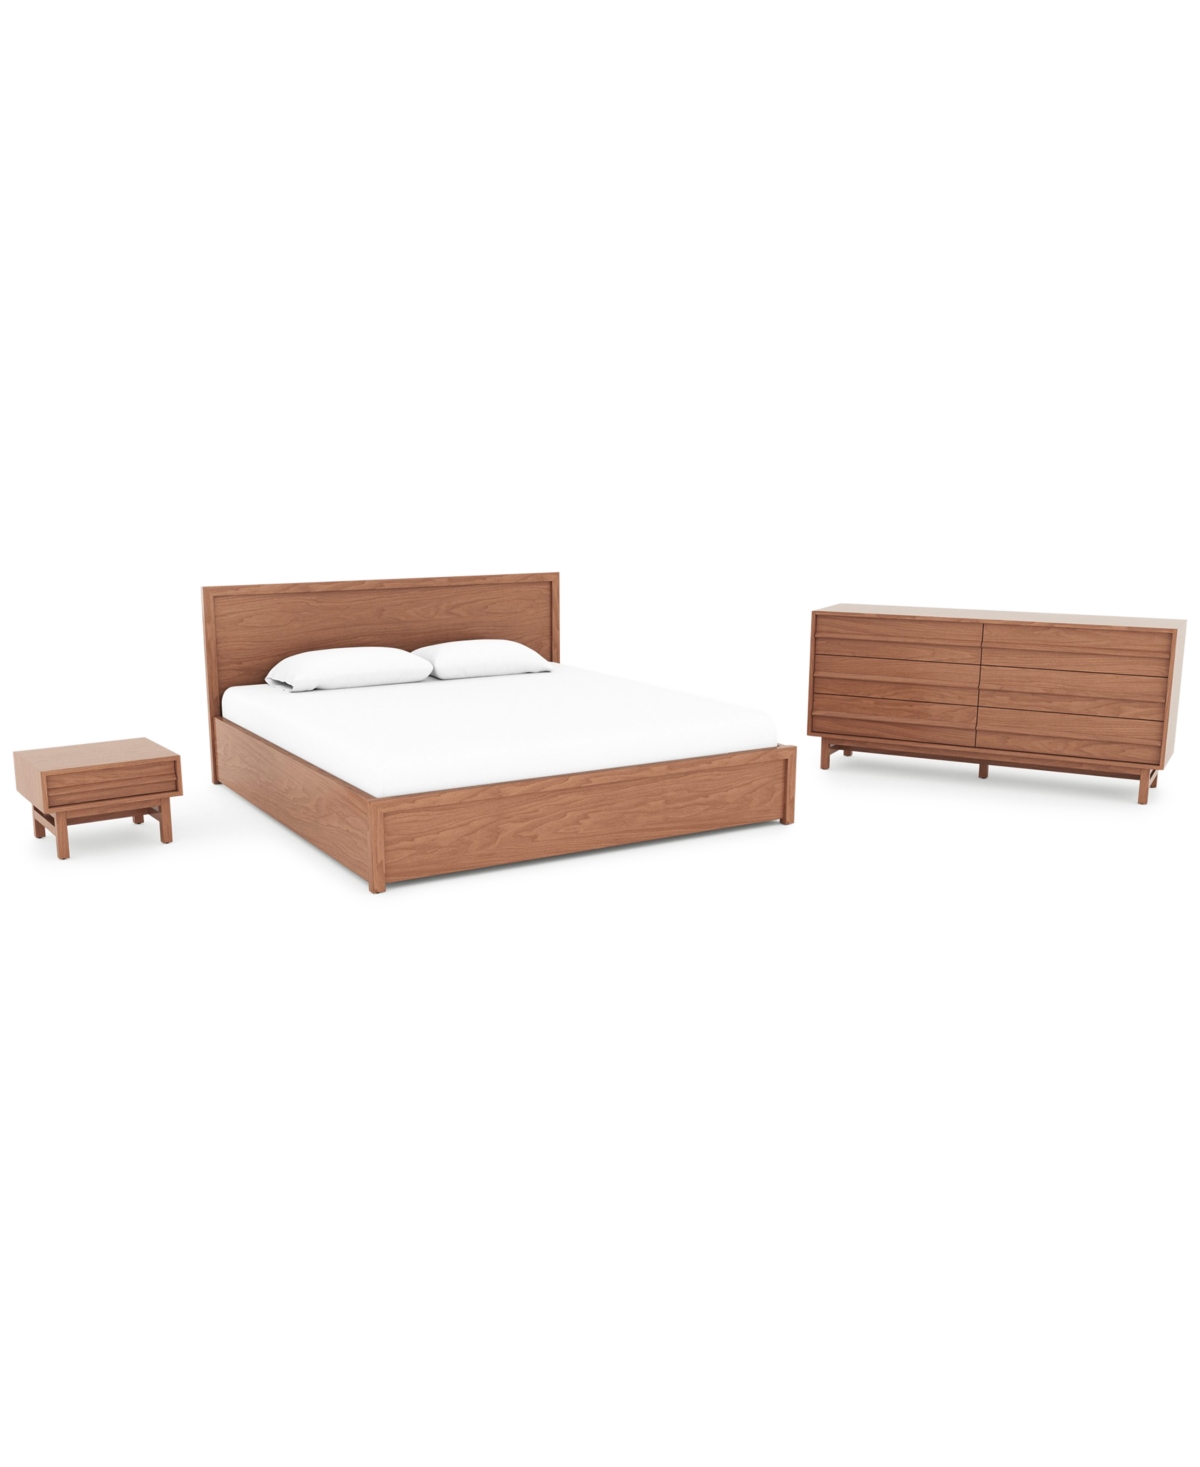 Eq3 Closeout! Bernia 3pc Bedroom Set (king Bed + Dresser + Nightstand) In No Color